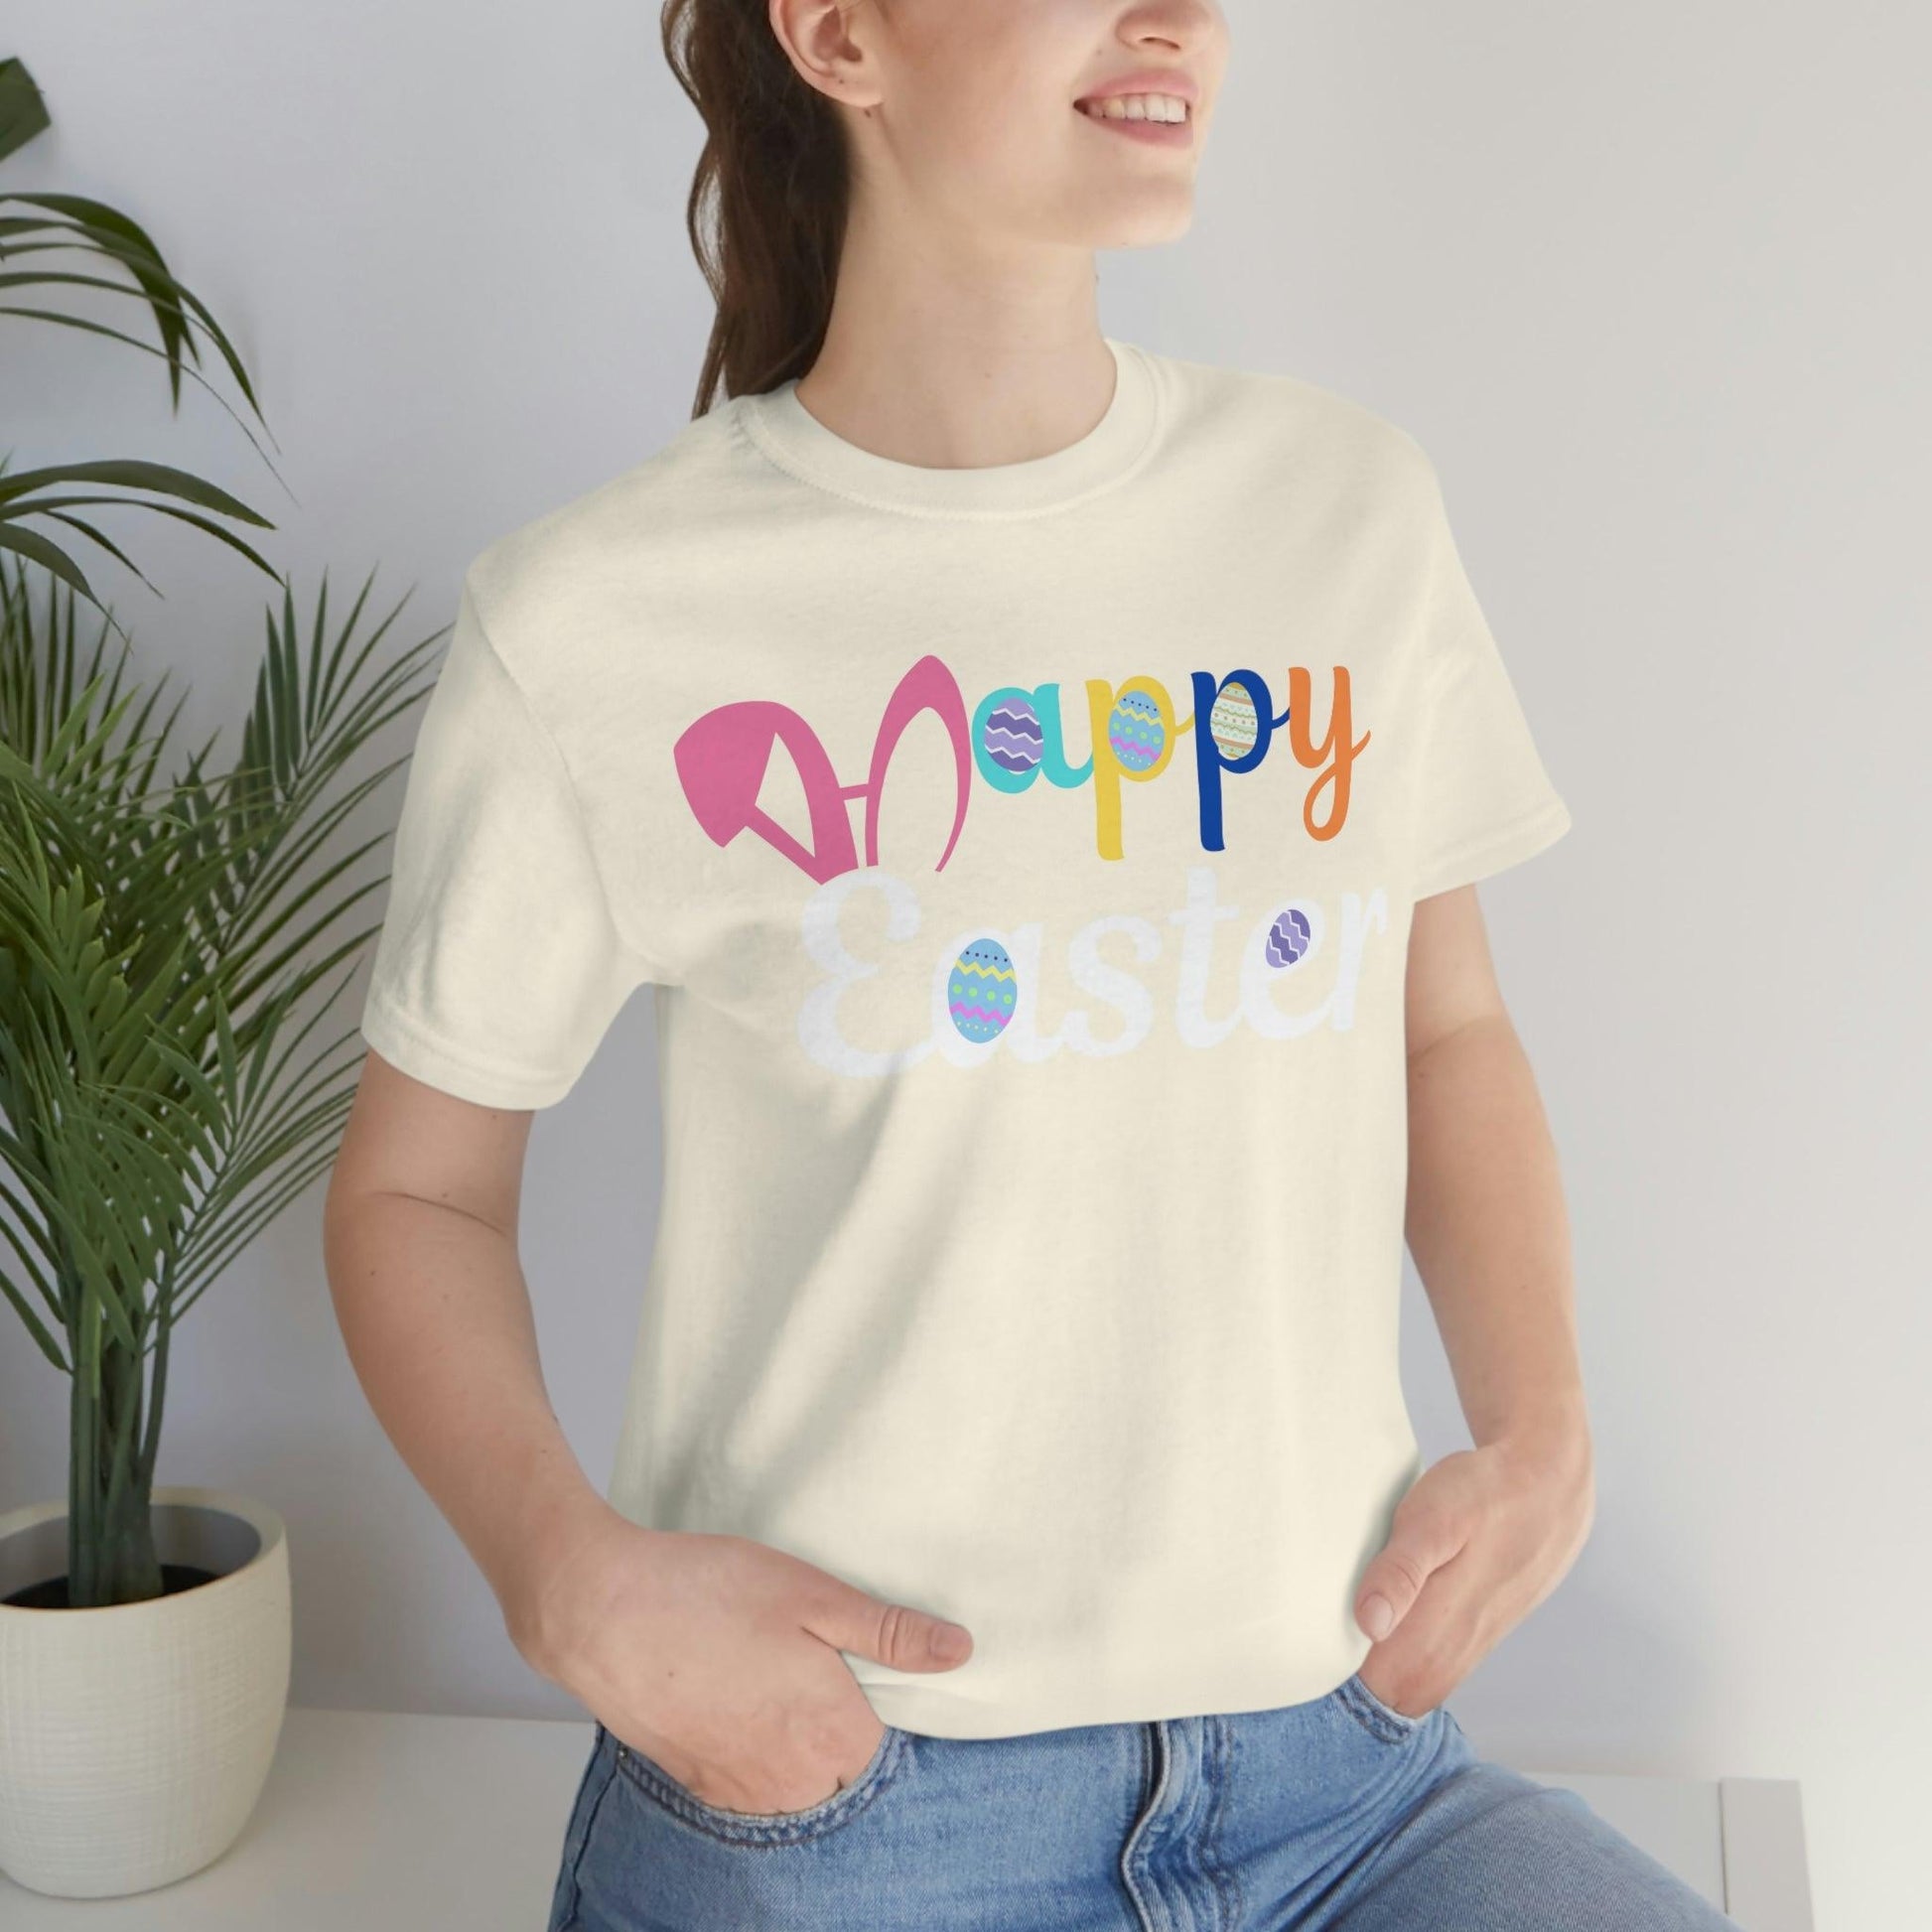 Happy Easter Tshirt, Easter gift for Adults - Giftsmojo